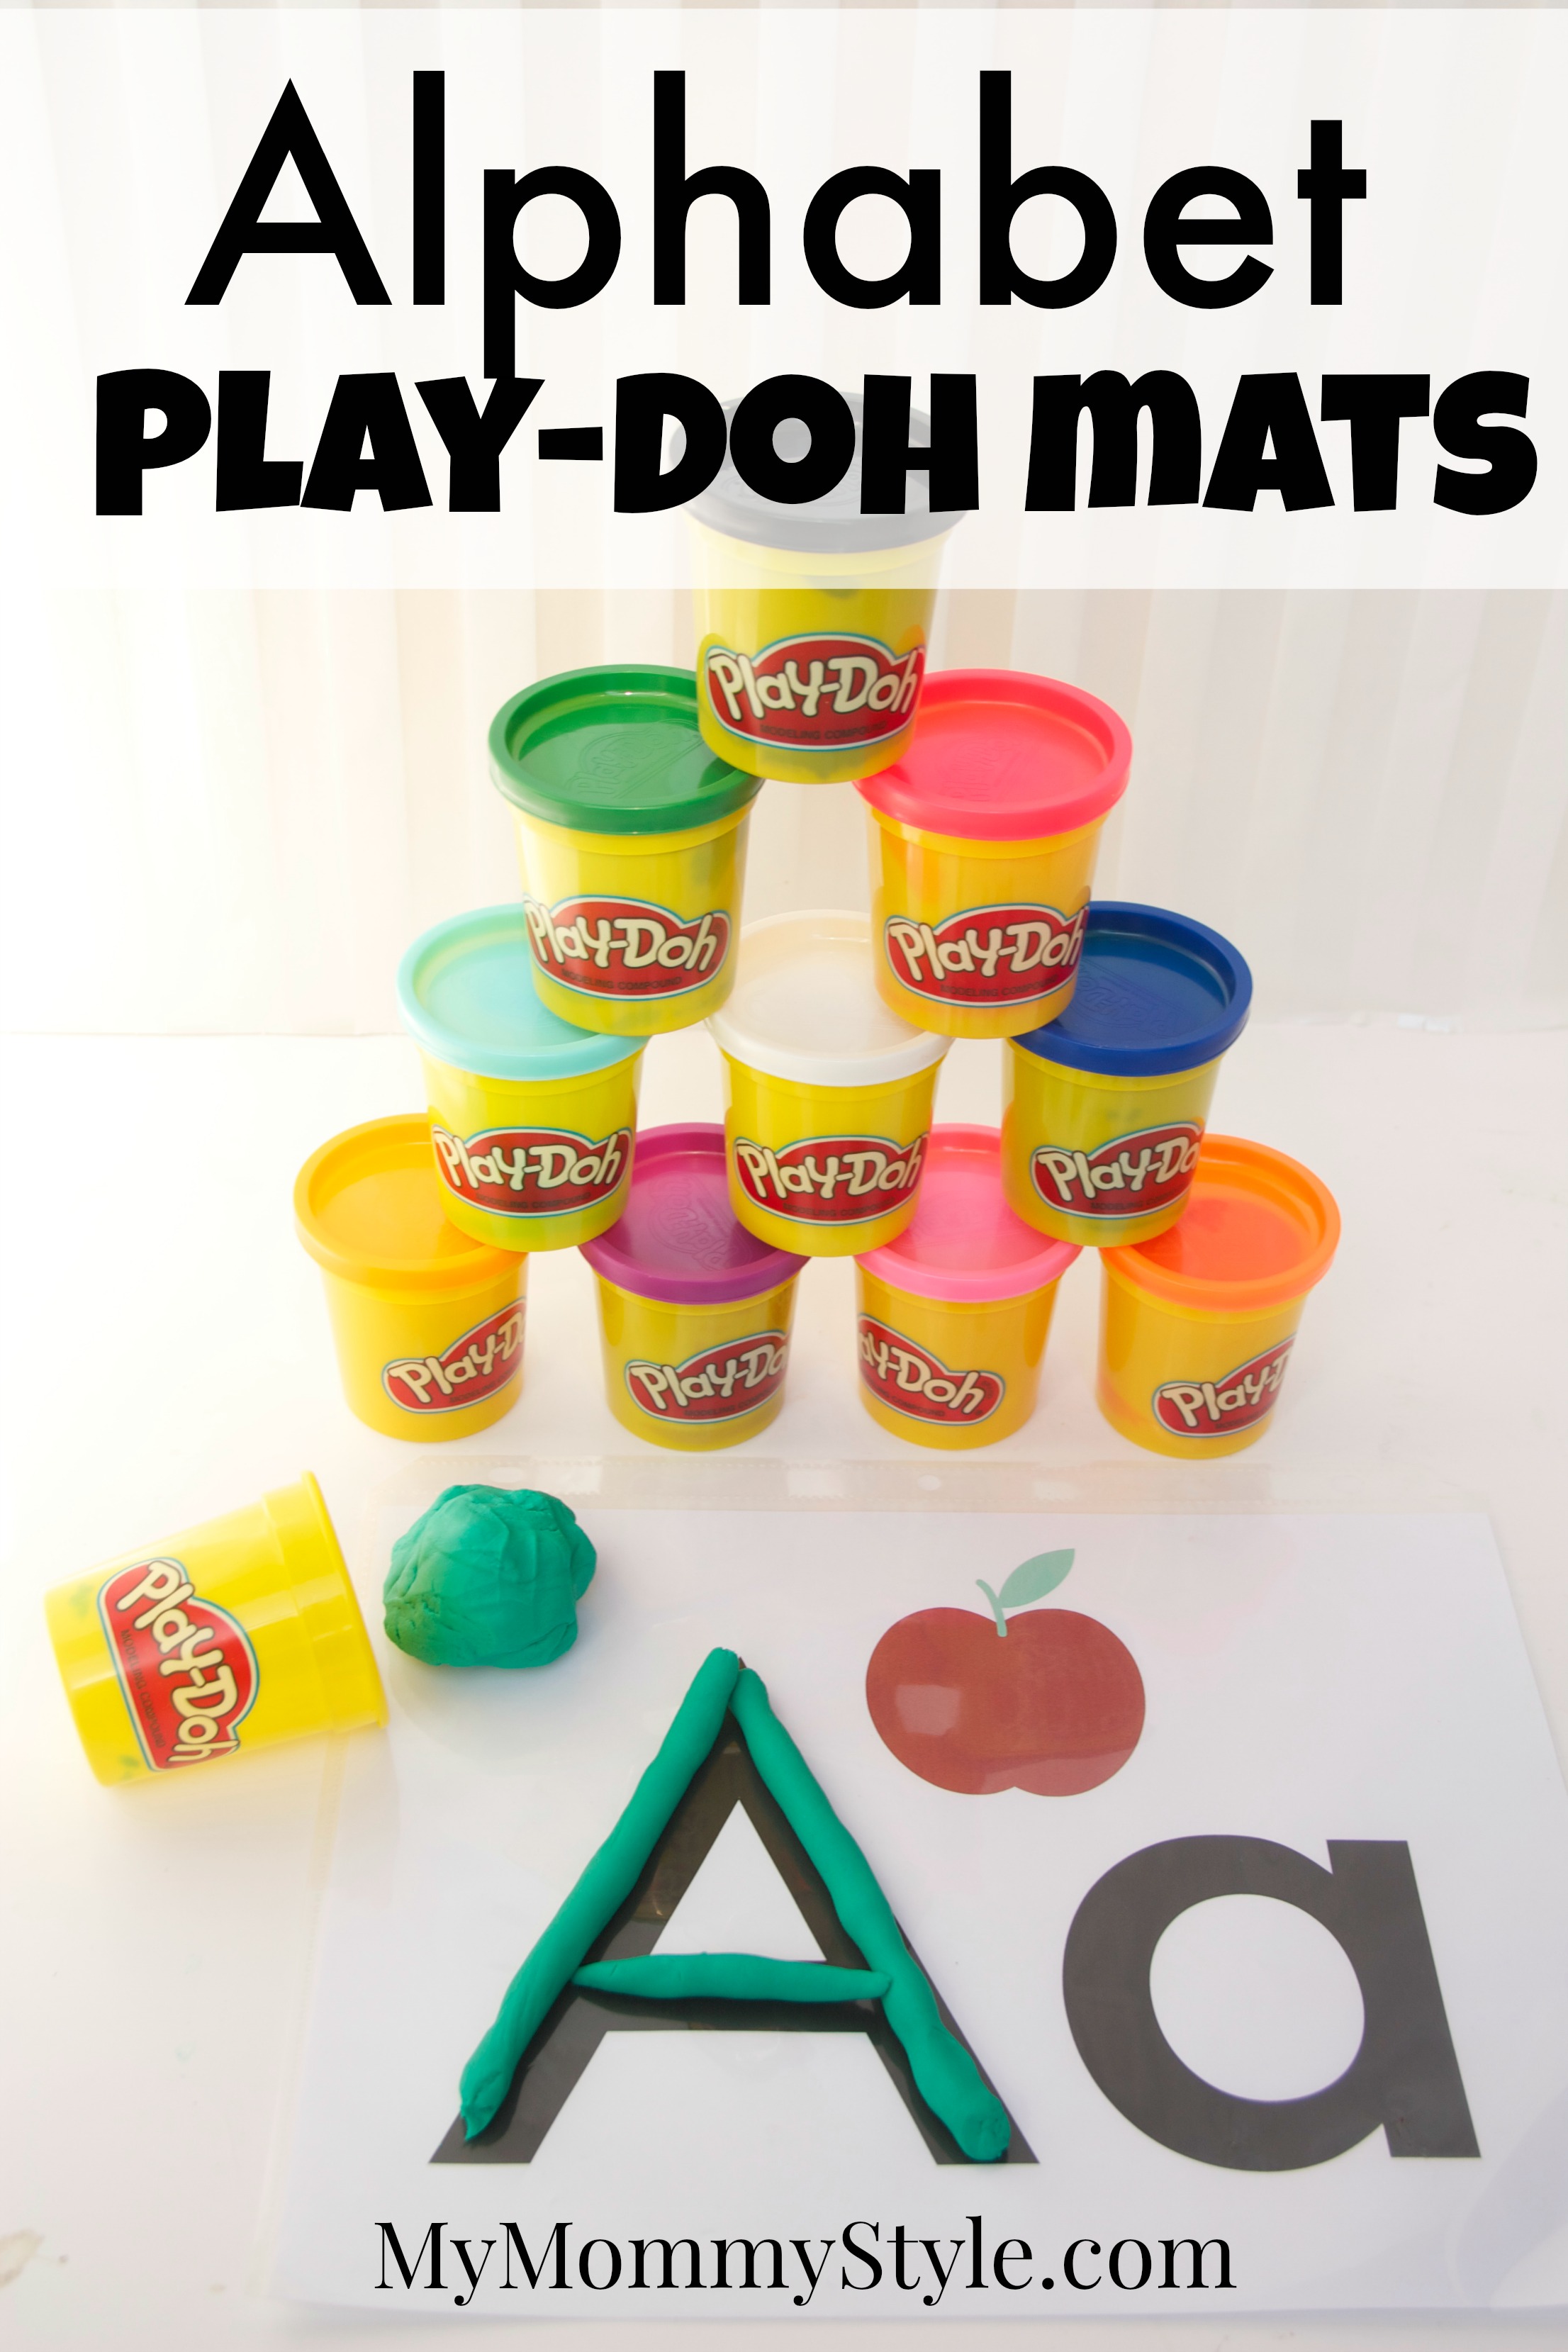 Free printable alphabet play doh mats - My Mommy Style